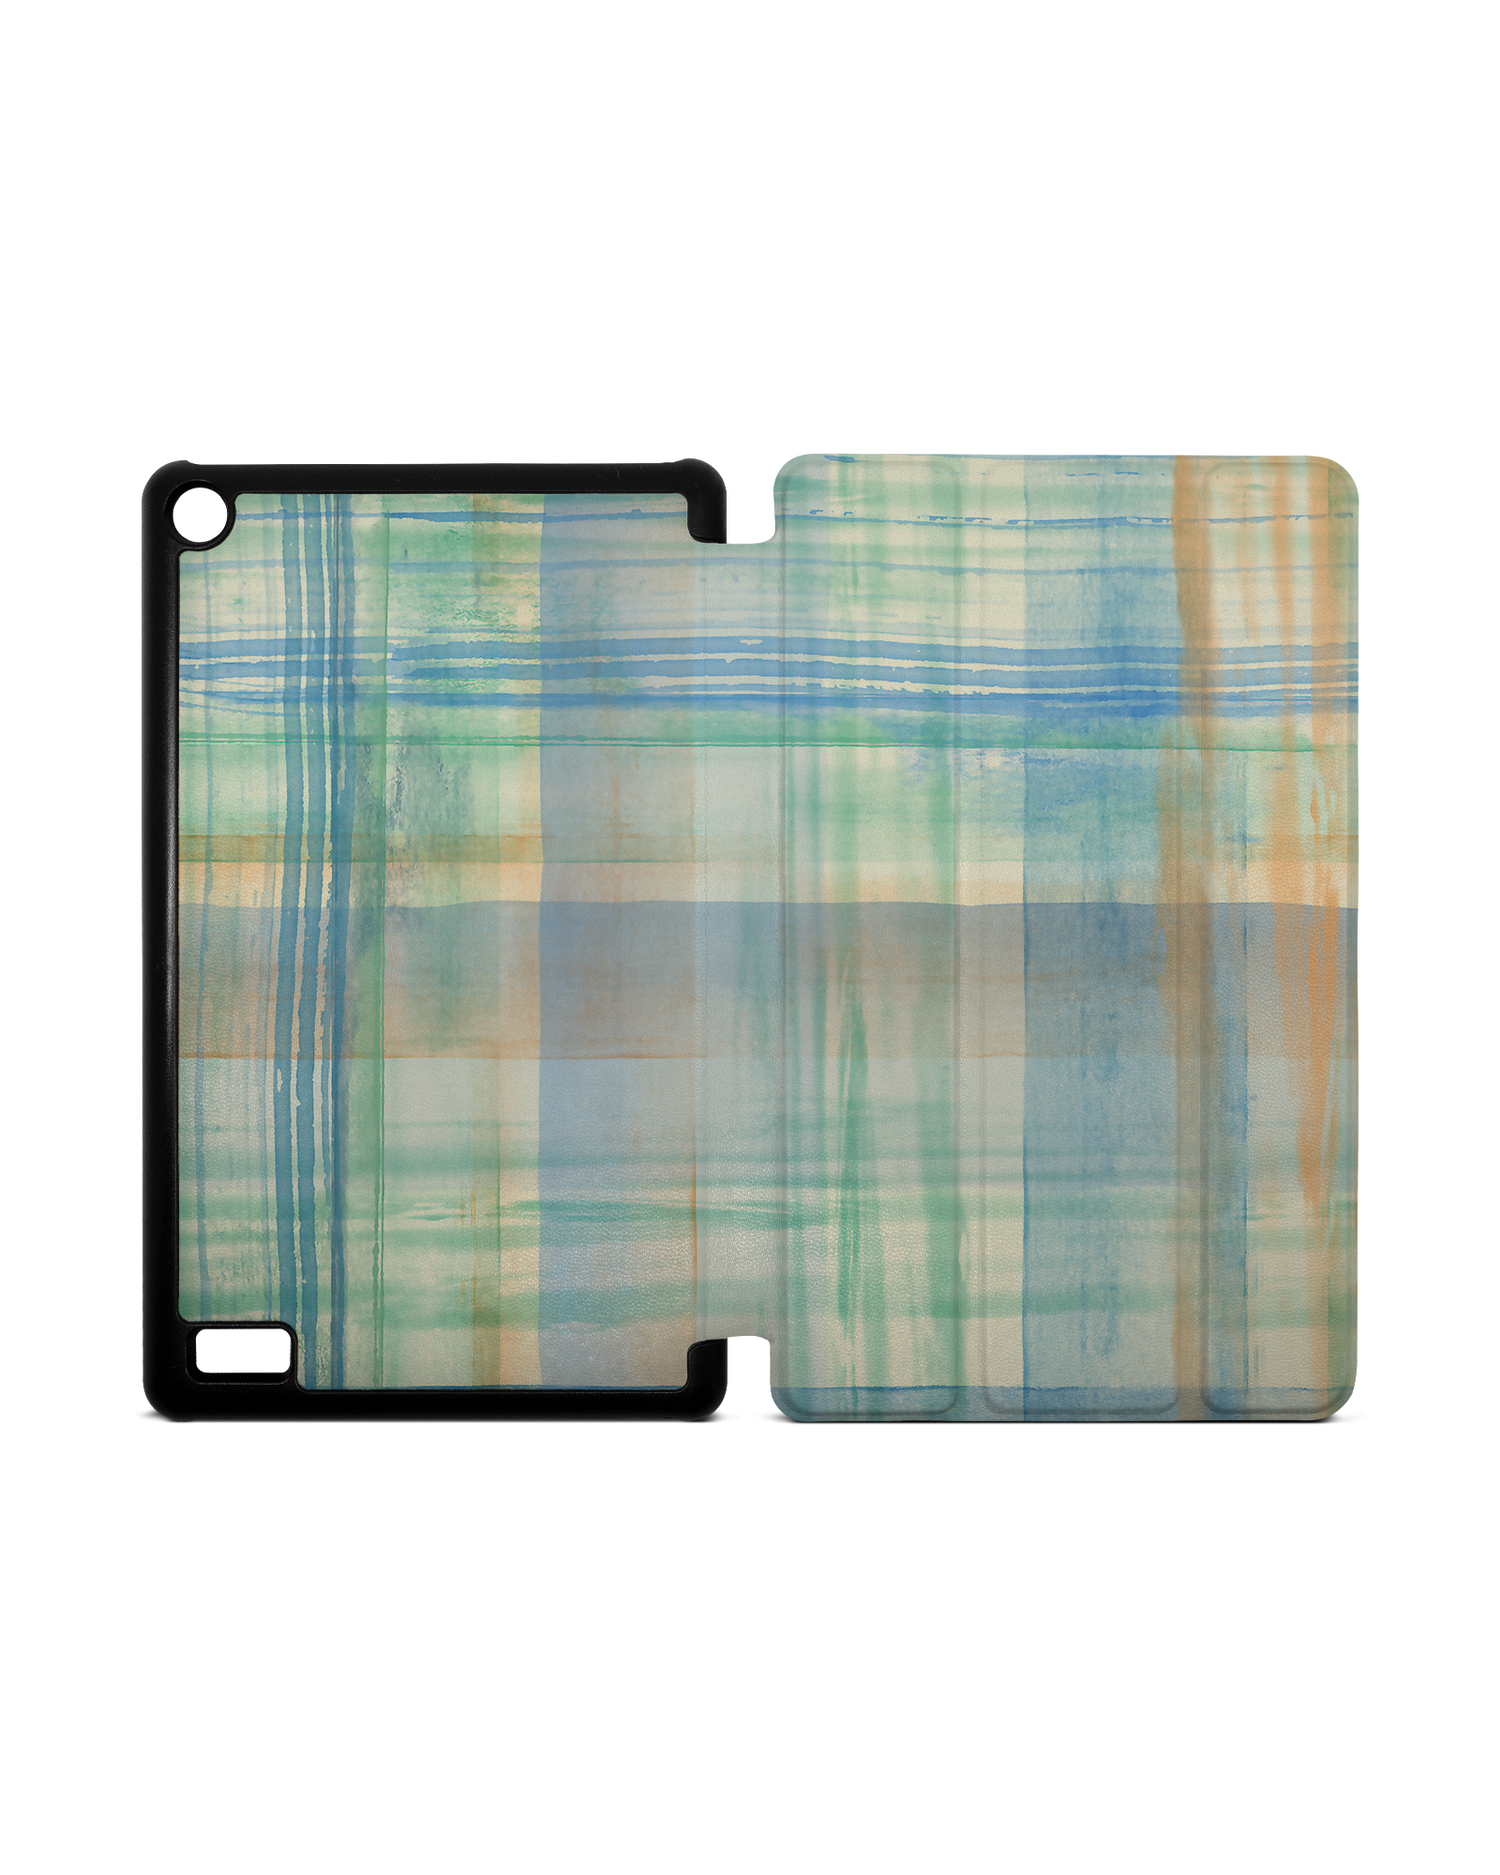 Washed Out Plaid Tablet Smart Case for Amazon Fire 7: Opened